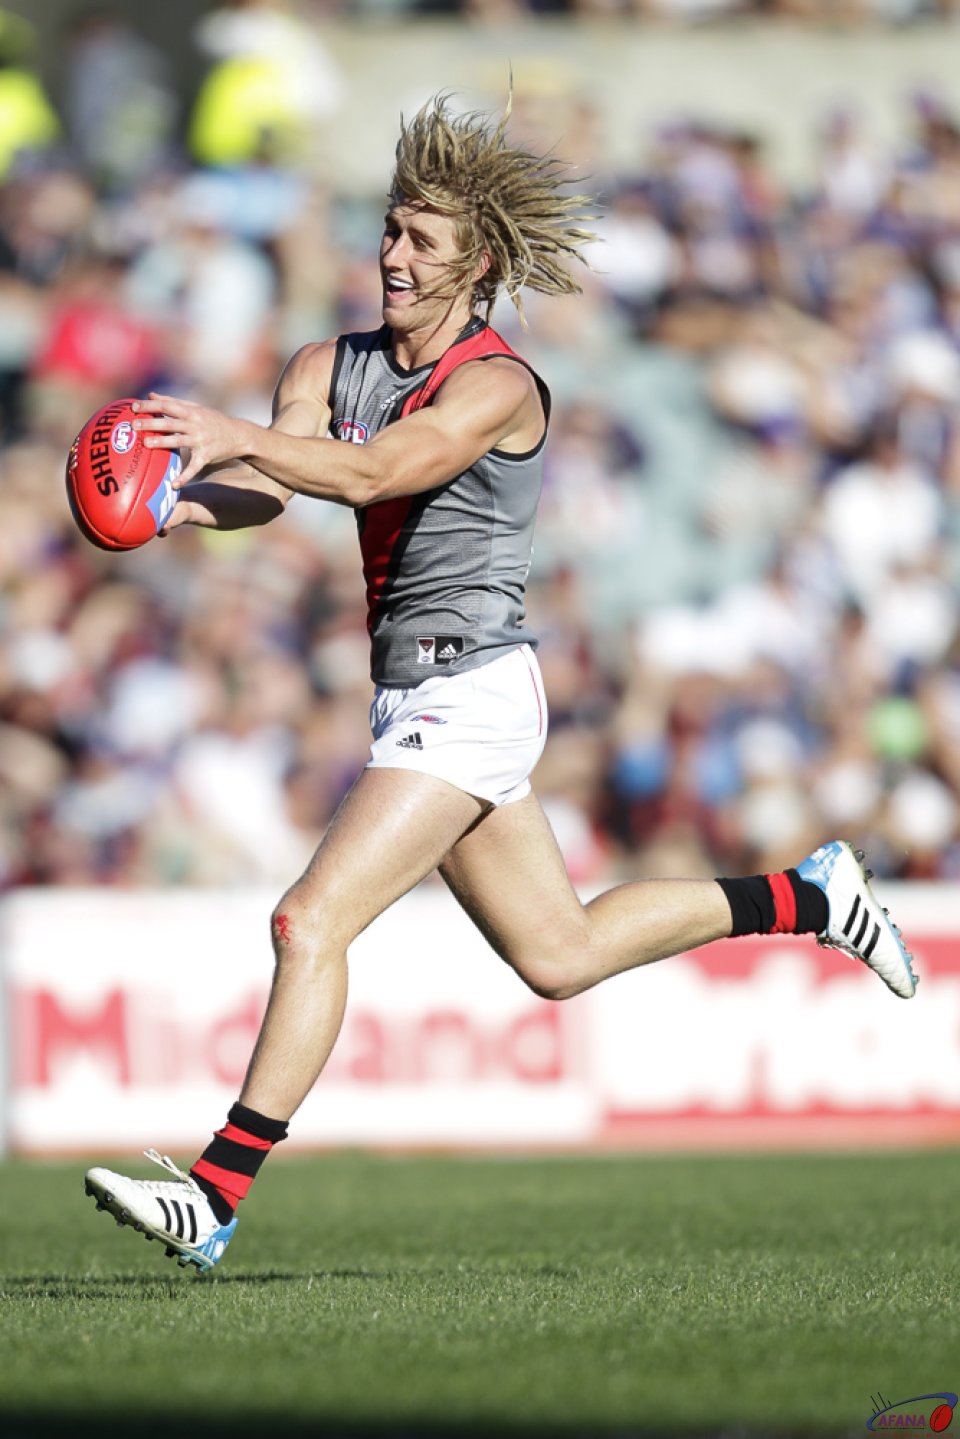 Heppell All Smiles